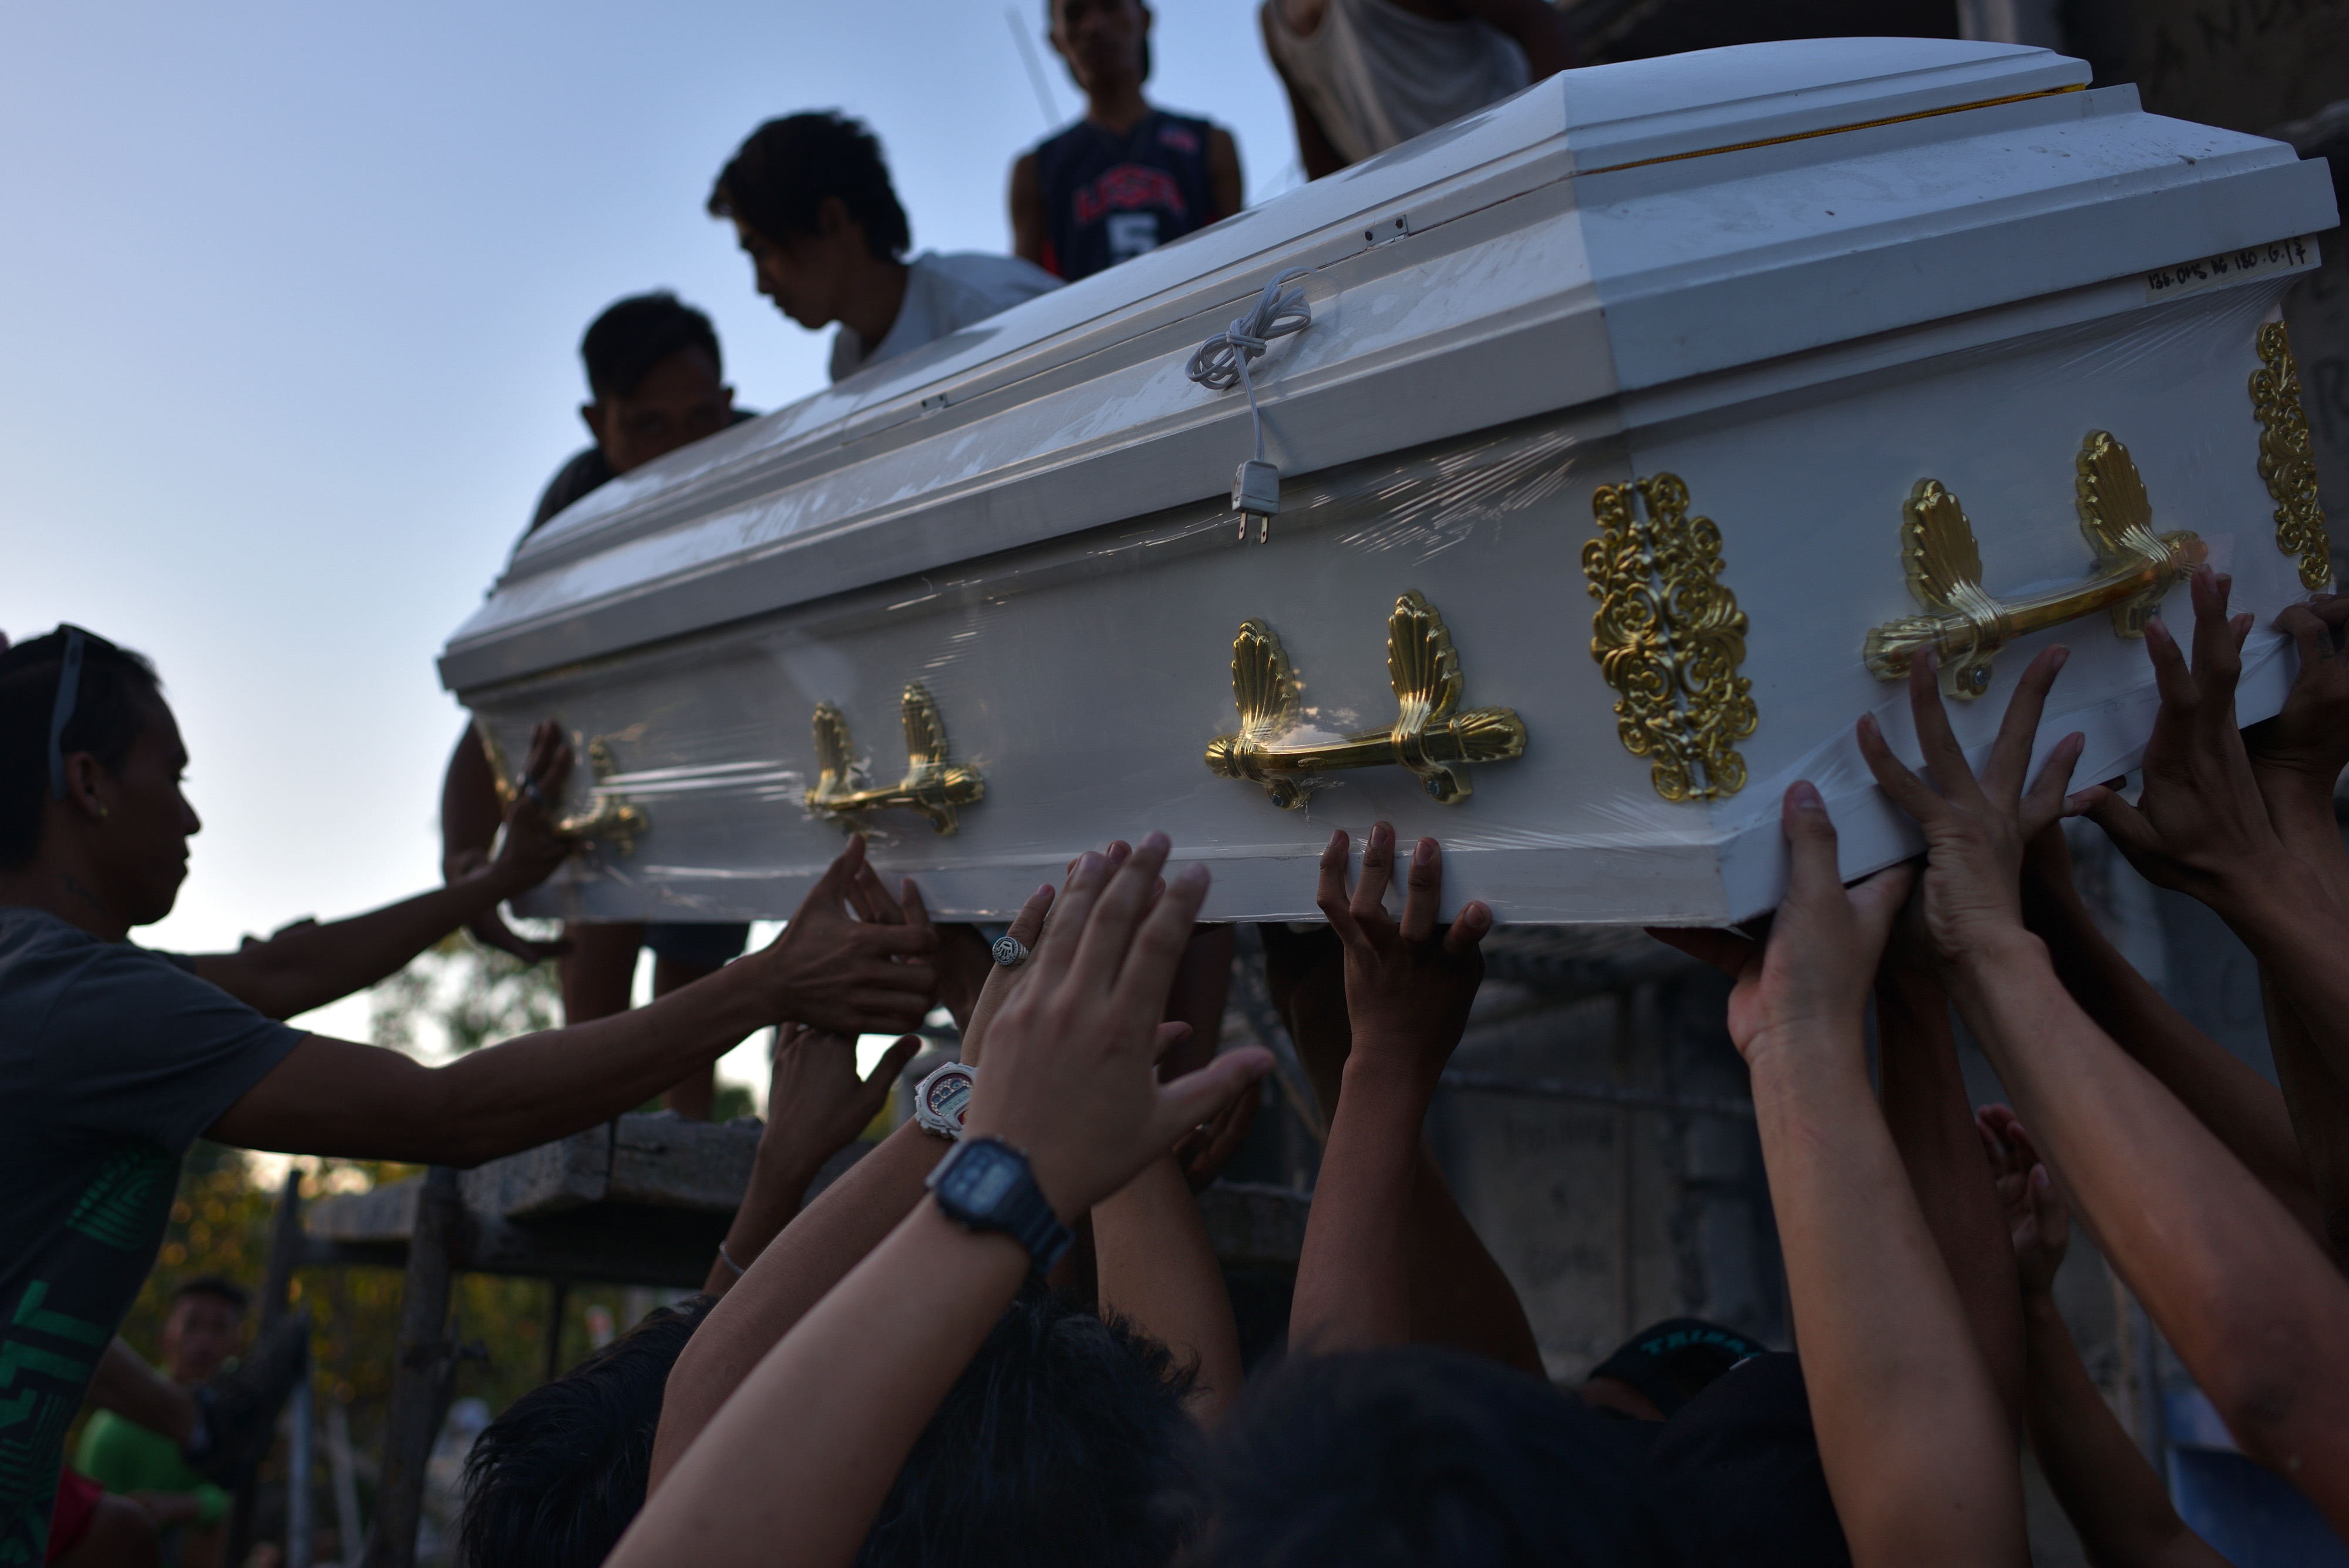 Friends and family carry the coffin of Jerico Camitan in a public cemetery on Nov. 13, 2016, in the Philippine city of Caloocan. Camitan, 21, and his partner Erica Fernandez, 17, were killed by two gunmen. A placard saying that they were drug pushers was placed near their bodies, although a drug test during autopsy cleared them of any drug use. Police said that they are not on any drug watch-list. (Jes Aznar—Getty Images)